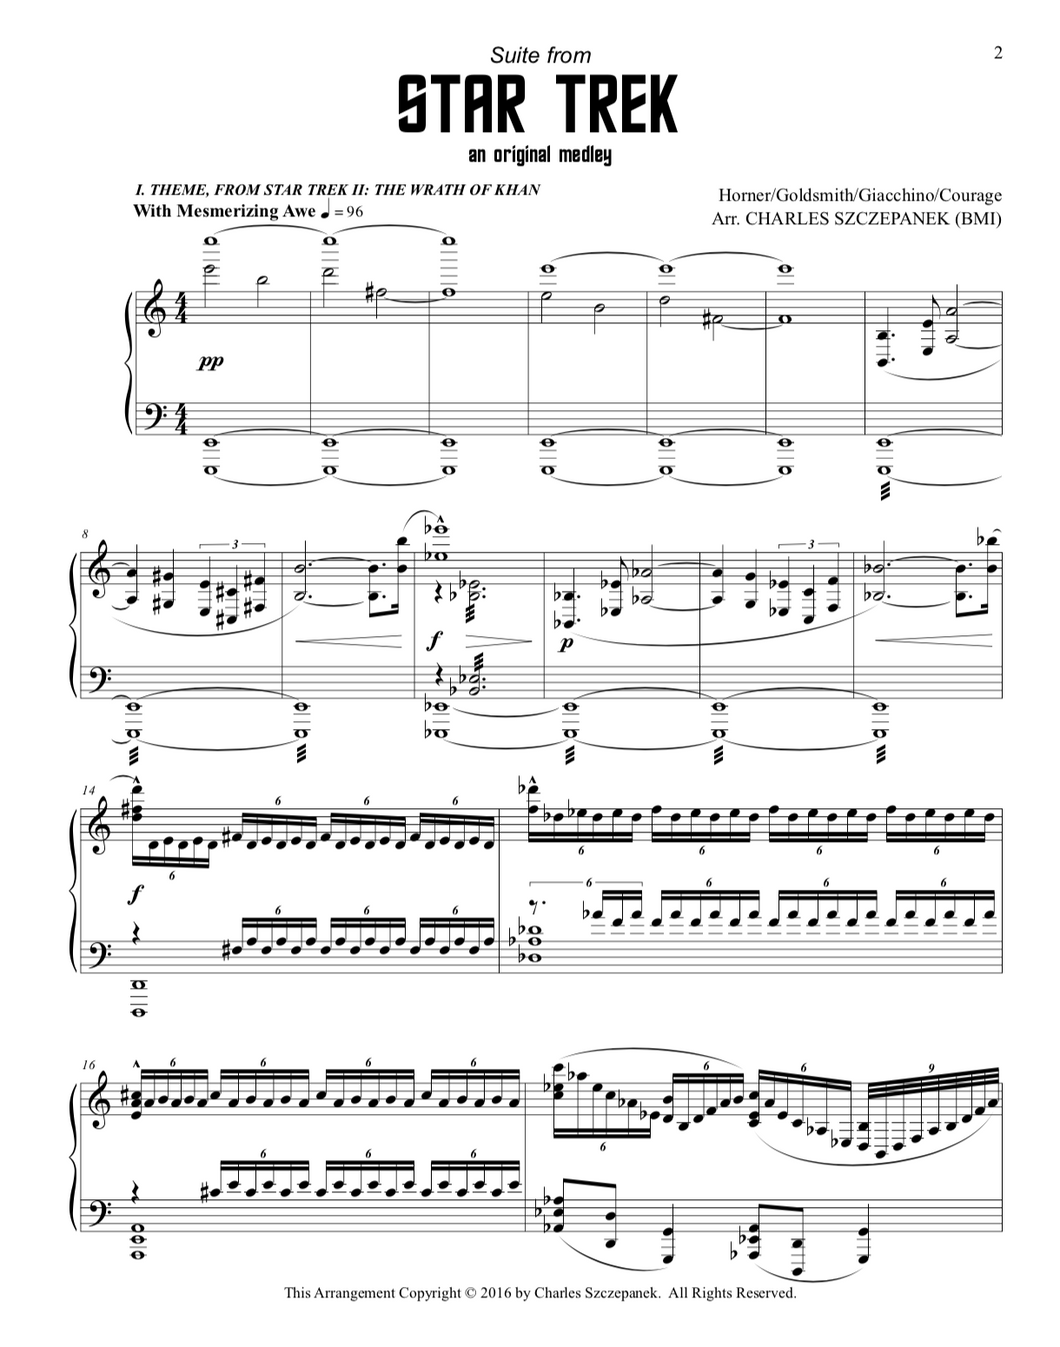 Suite from Star Trek-Sheet Music for solo piano